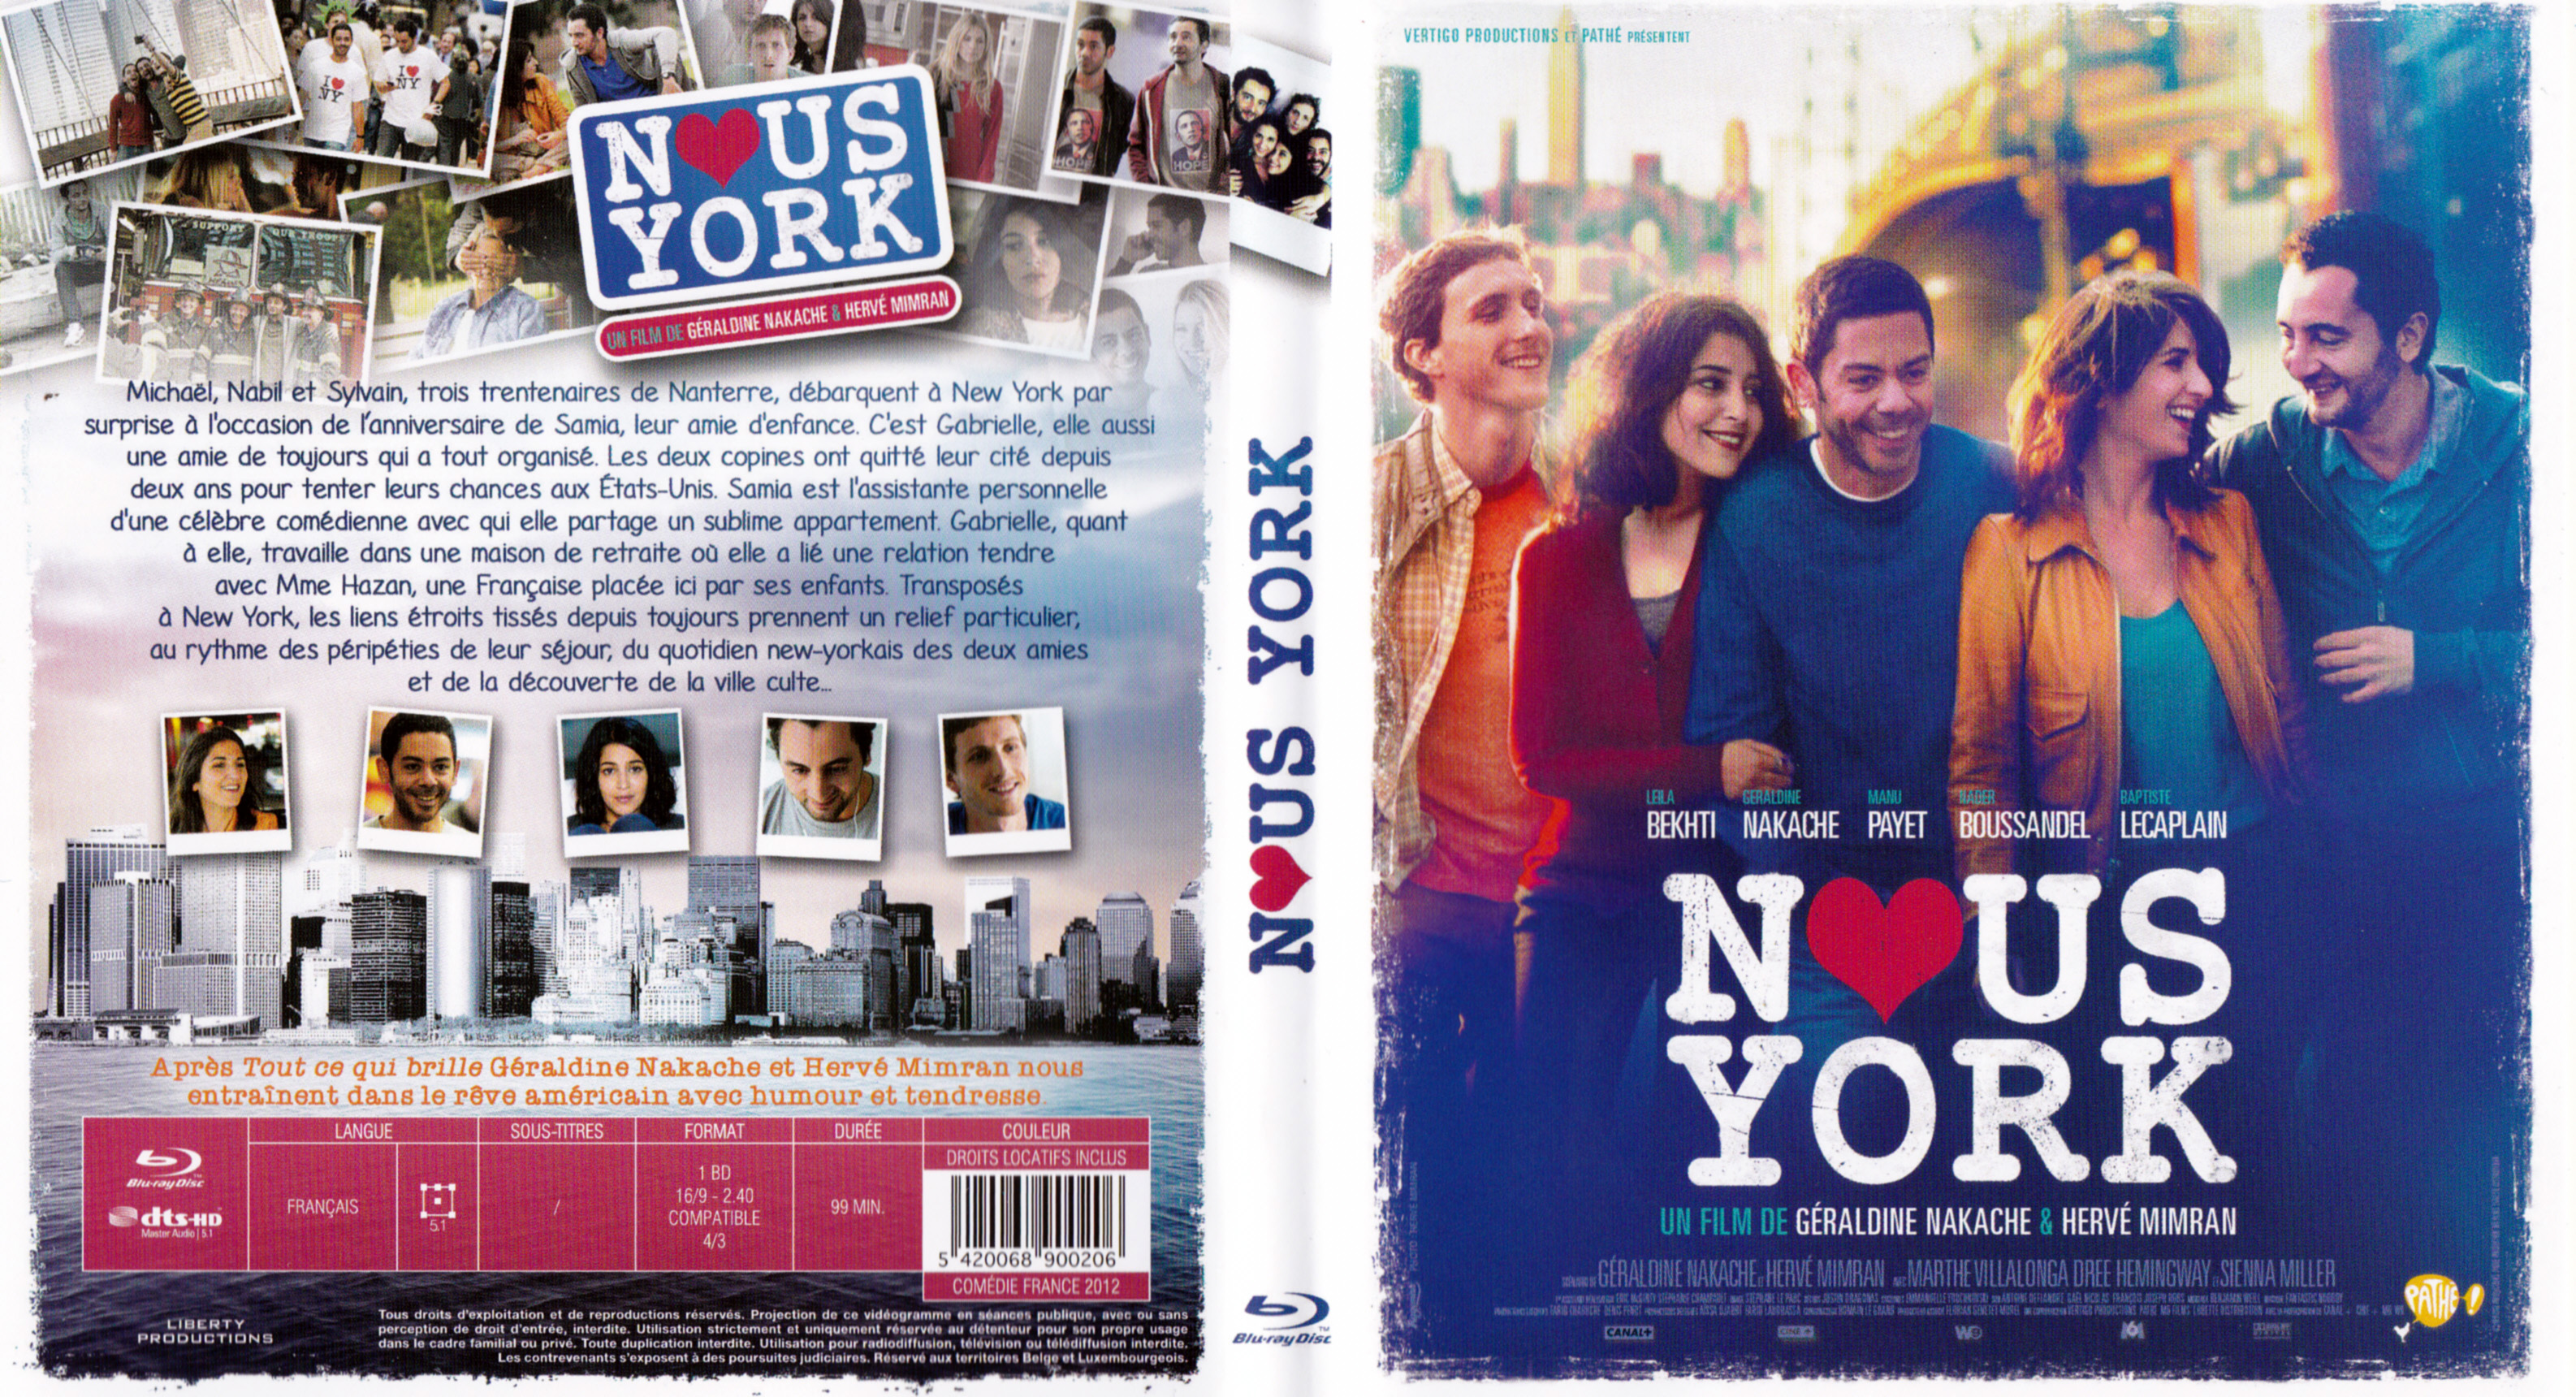 Jaquette DVD Nous York (BLU-RAY)